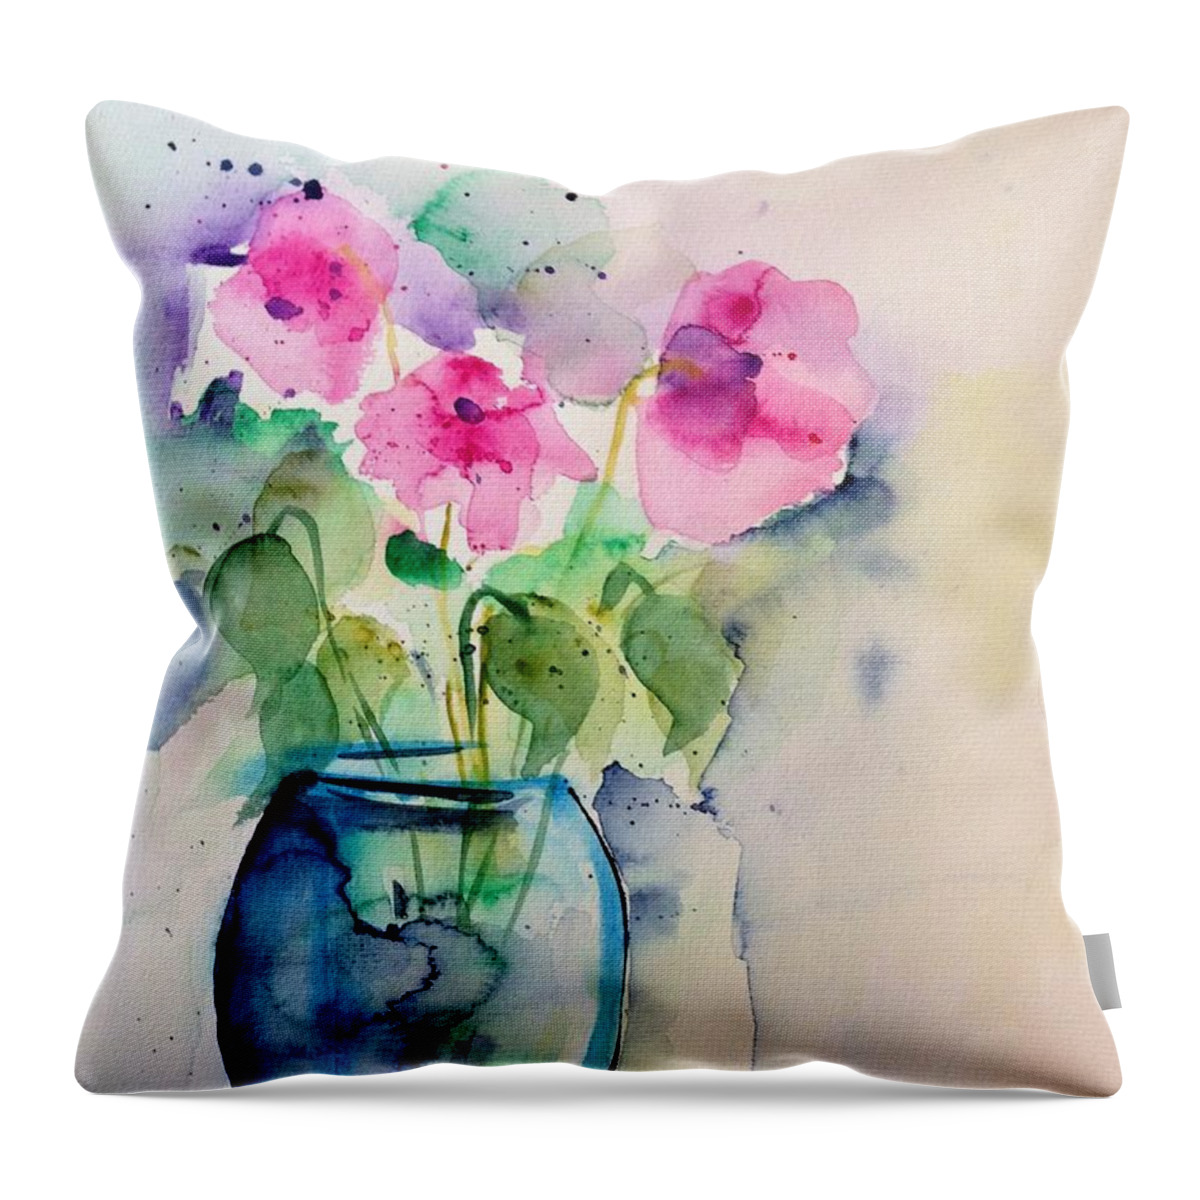 Three Throw Pillow featuring the painting Pink Flowers In The Vase by Britta Zehm